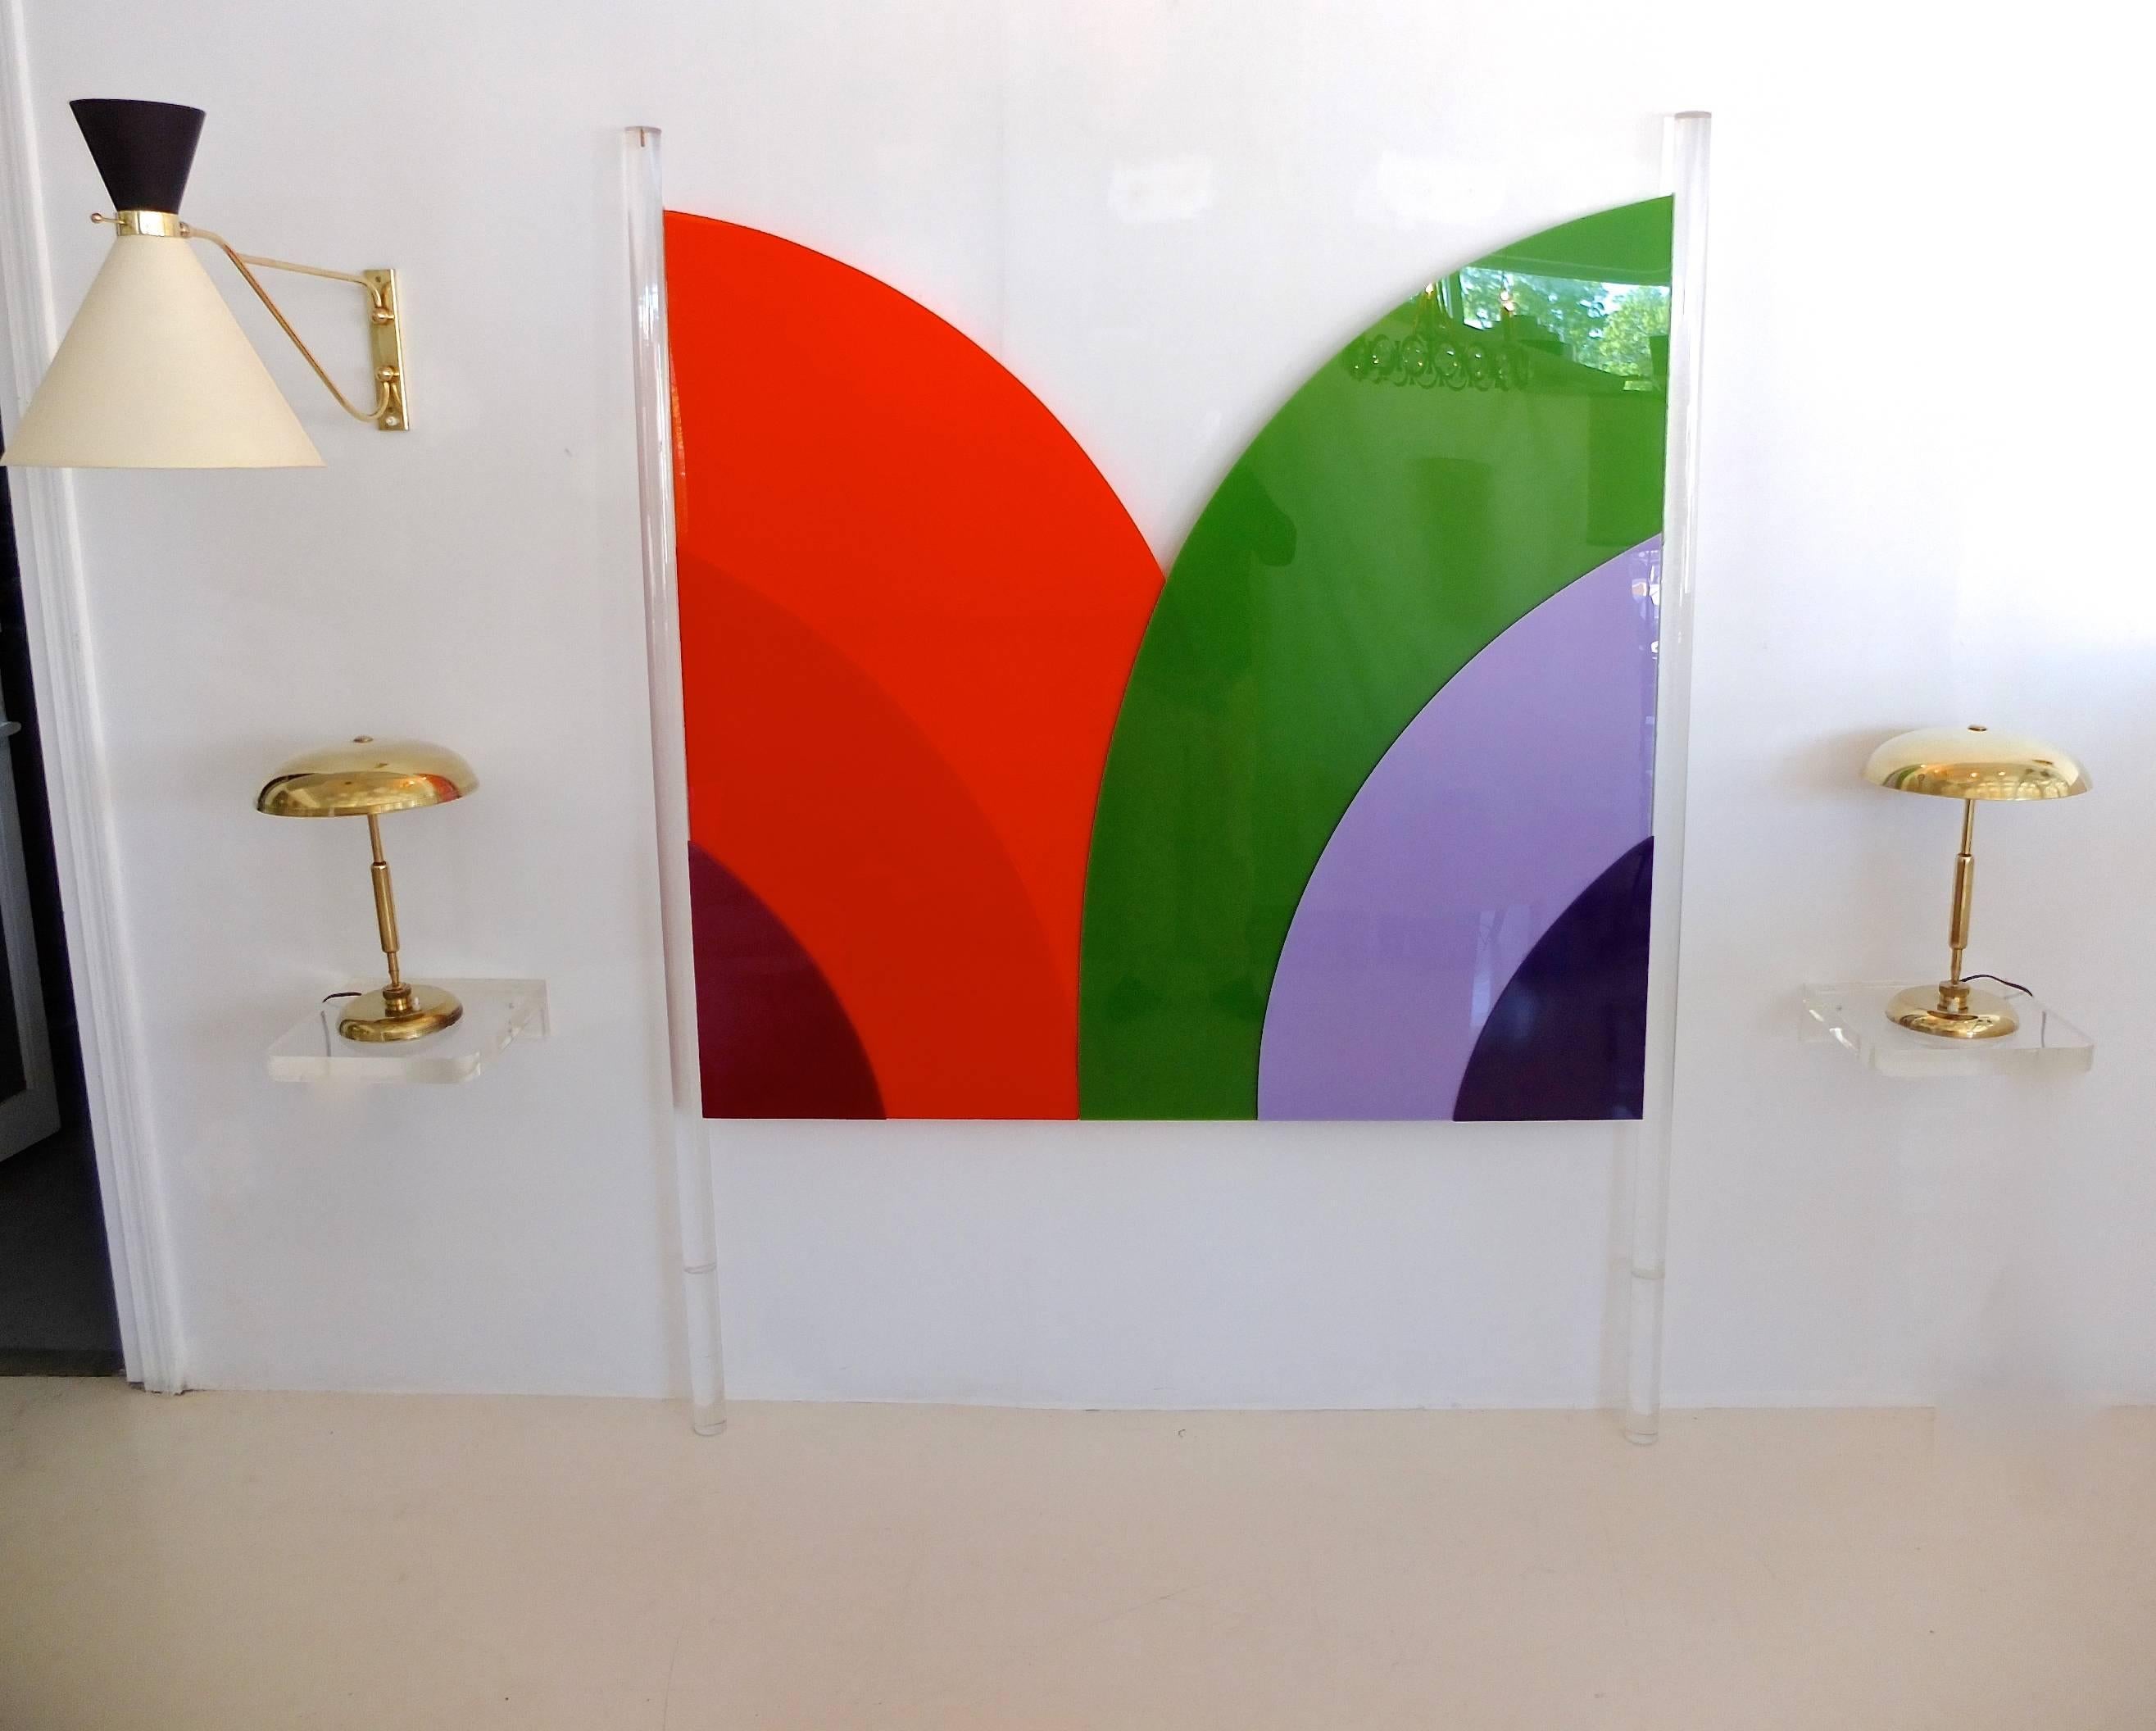 Fun pop art constructivist two-poster Lucite headboard with overlapping colored acrylic rainbow bands in the spirit of Frank Stella's protractor series from the 1960s.

Colors: Maroon, red, orange, green, light purple and dark purple.

Headboard